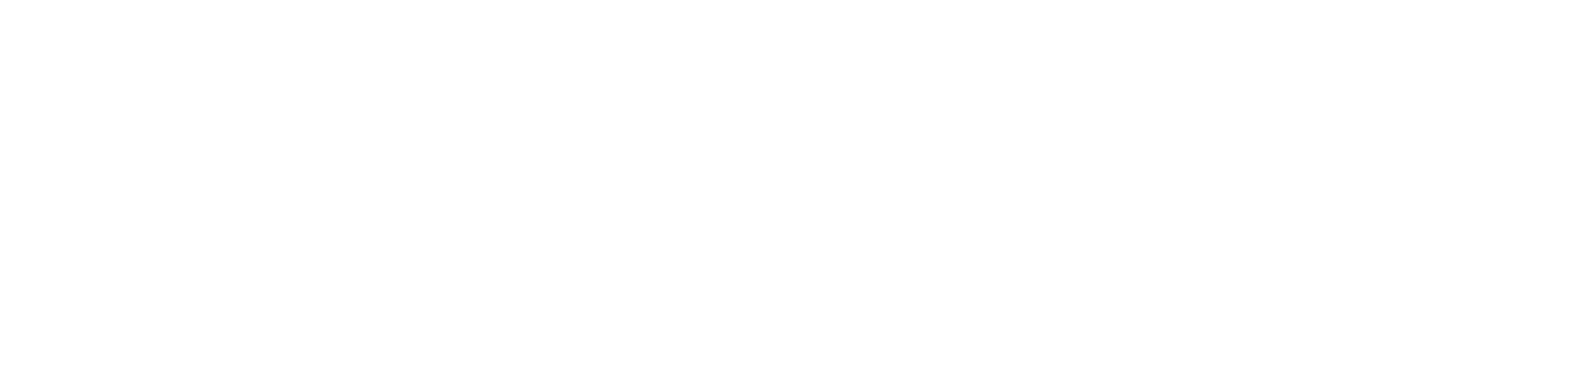 Universal Stainless & Alloy Products logo large for dark backgrounds (transparent PNG)